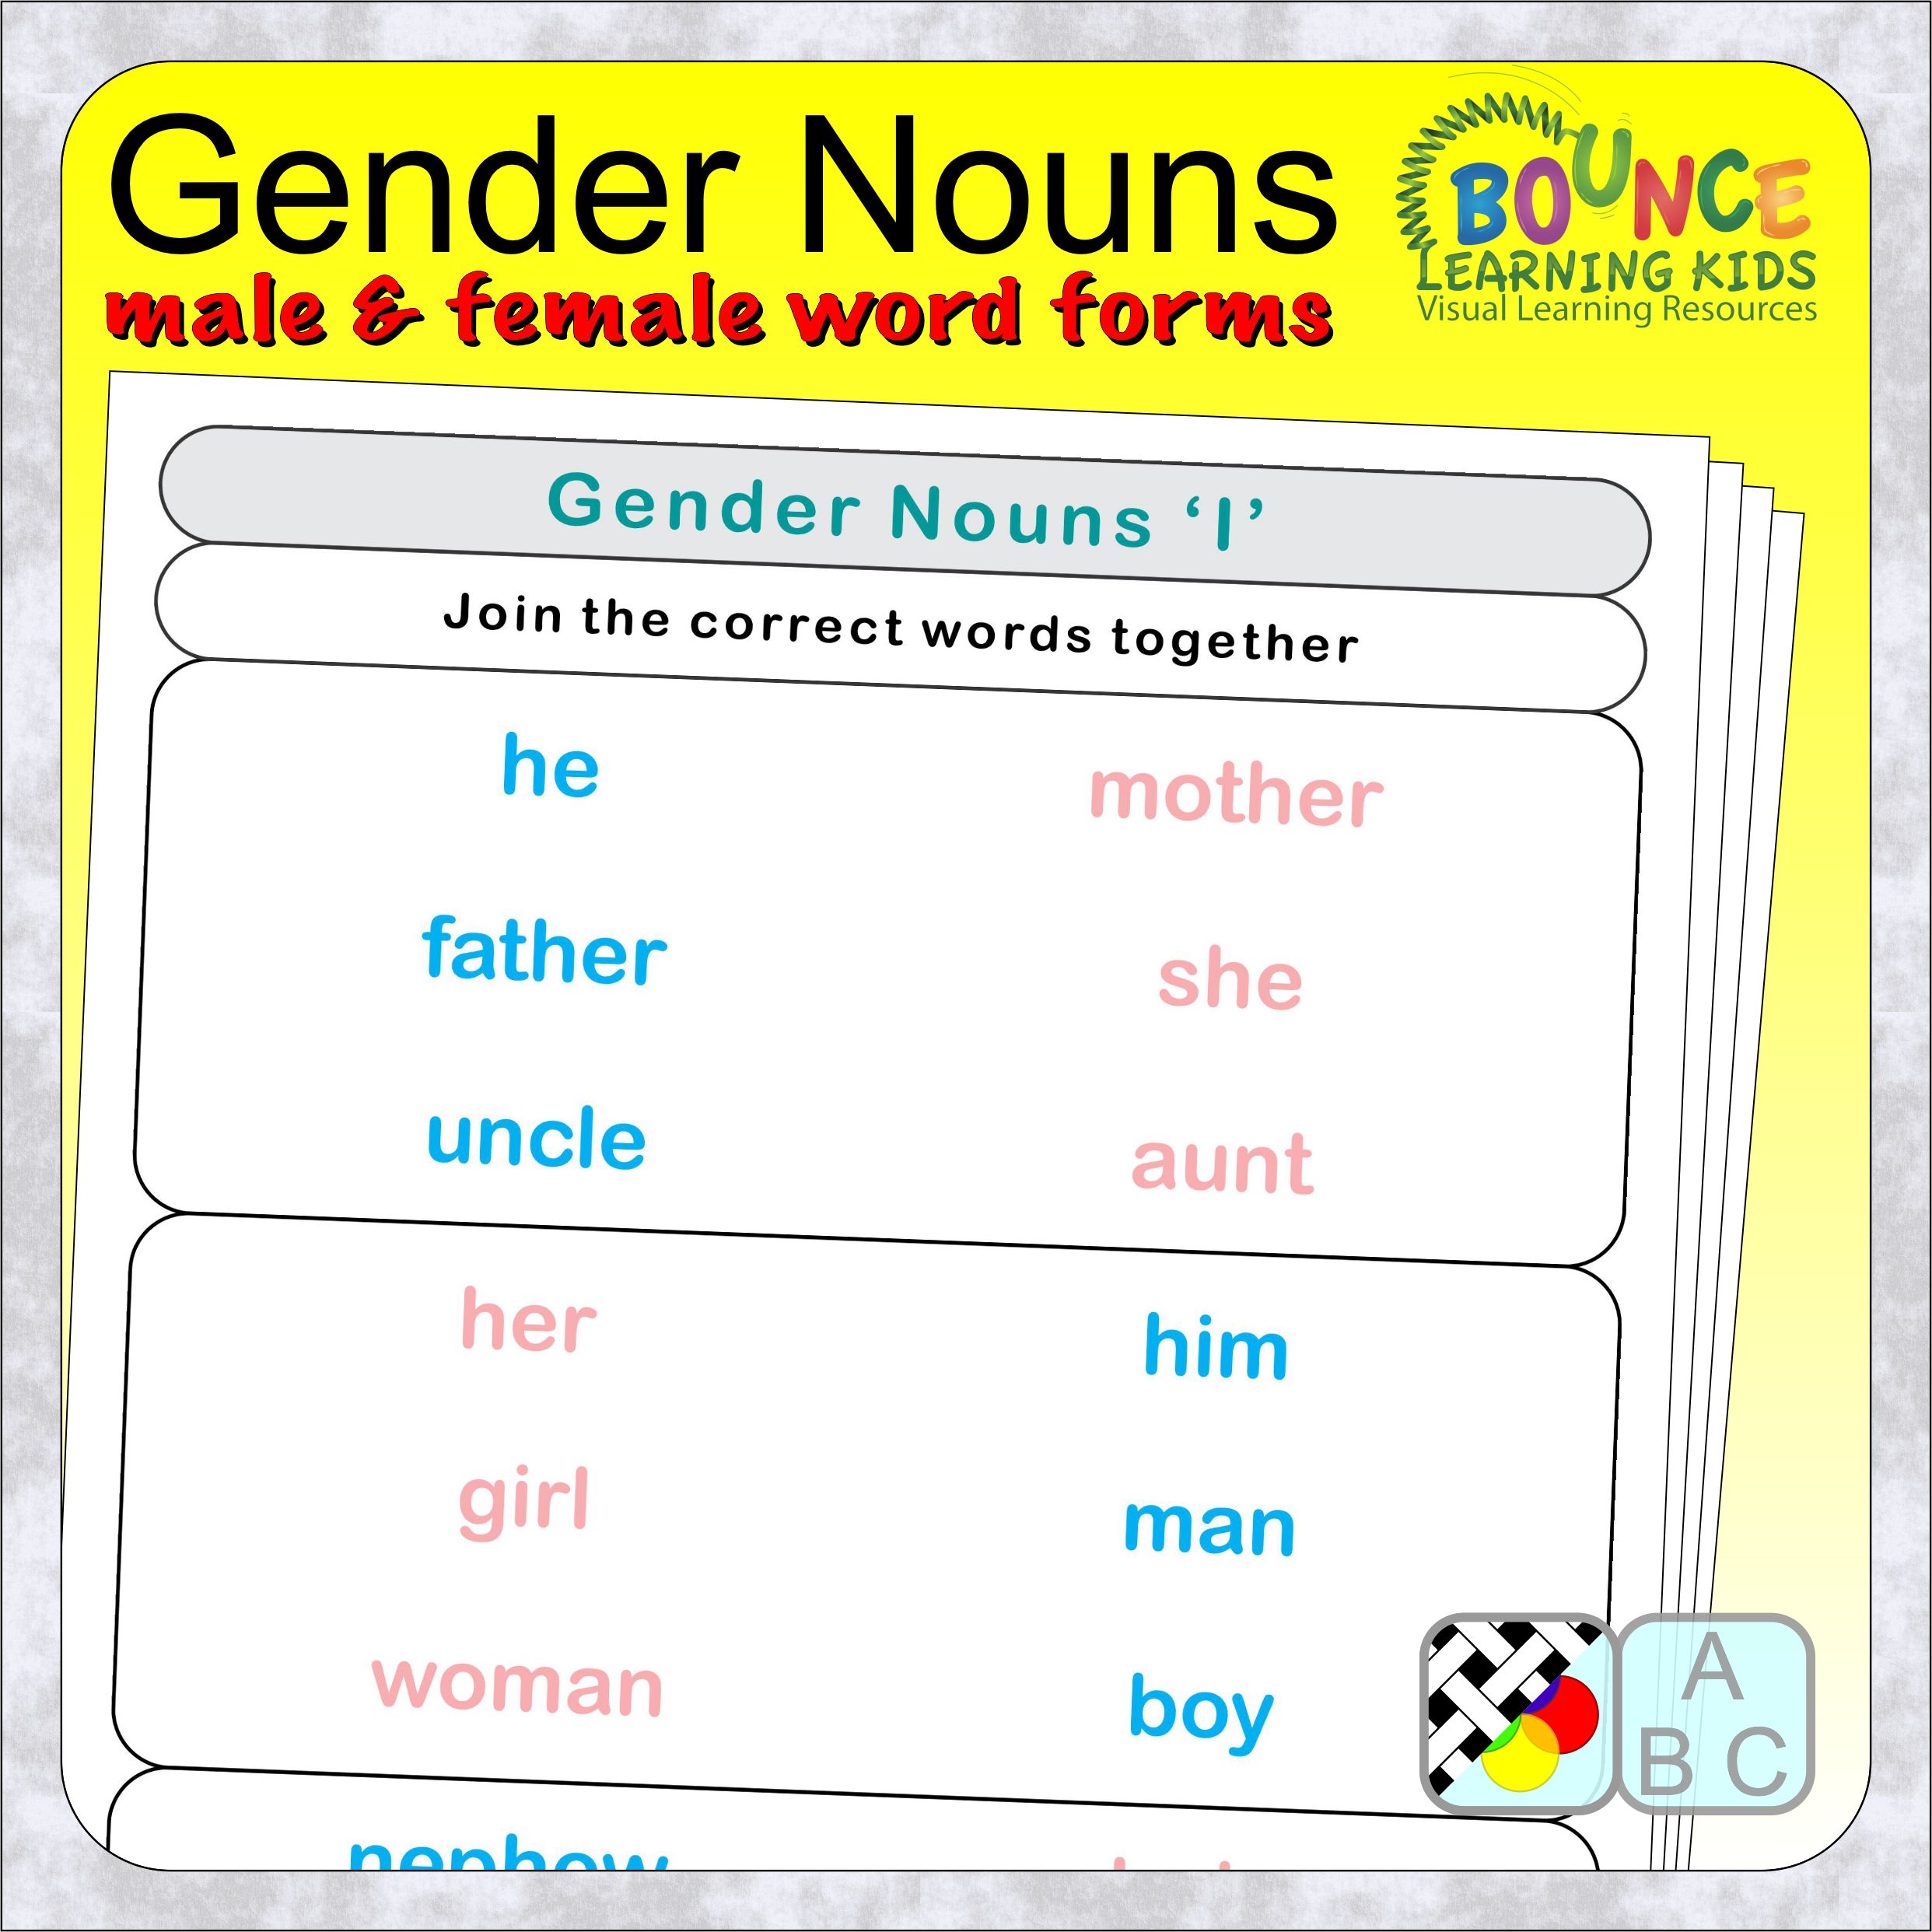 Gender Nouns Exercises With Answers